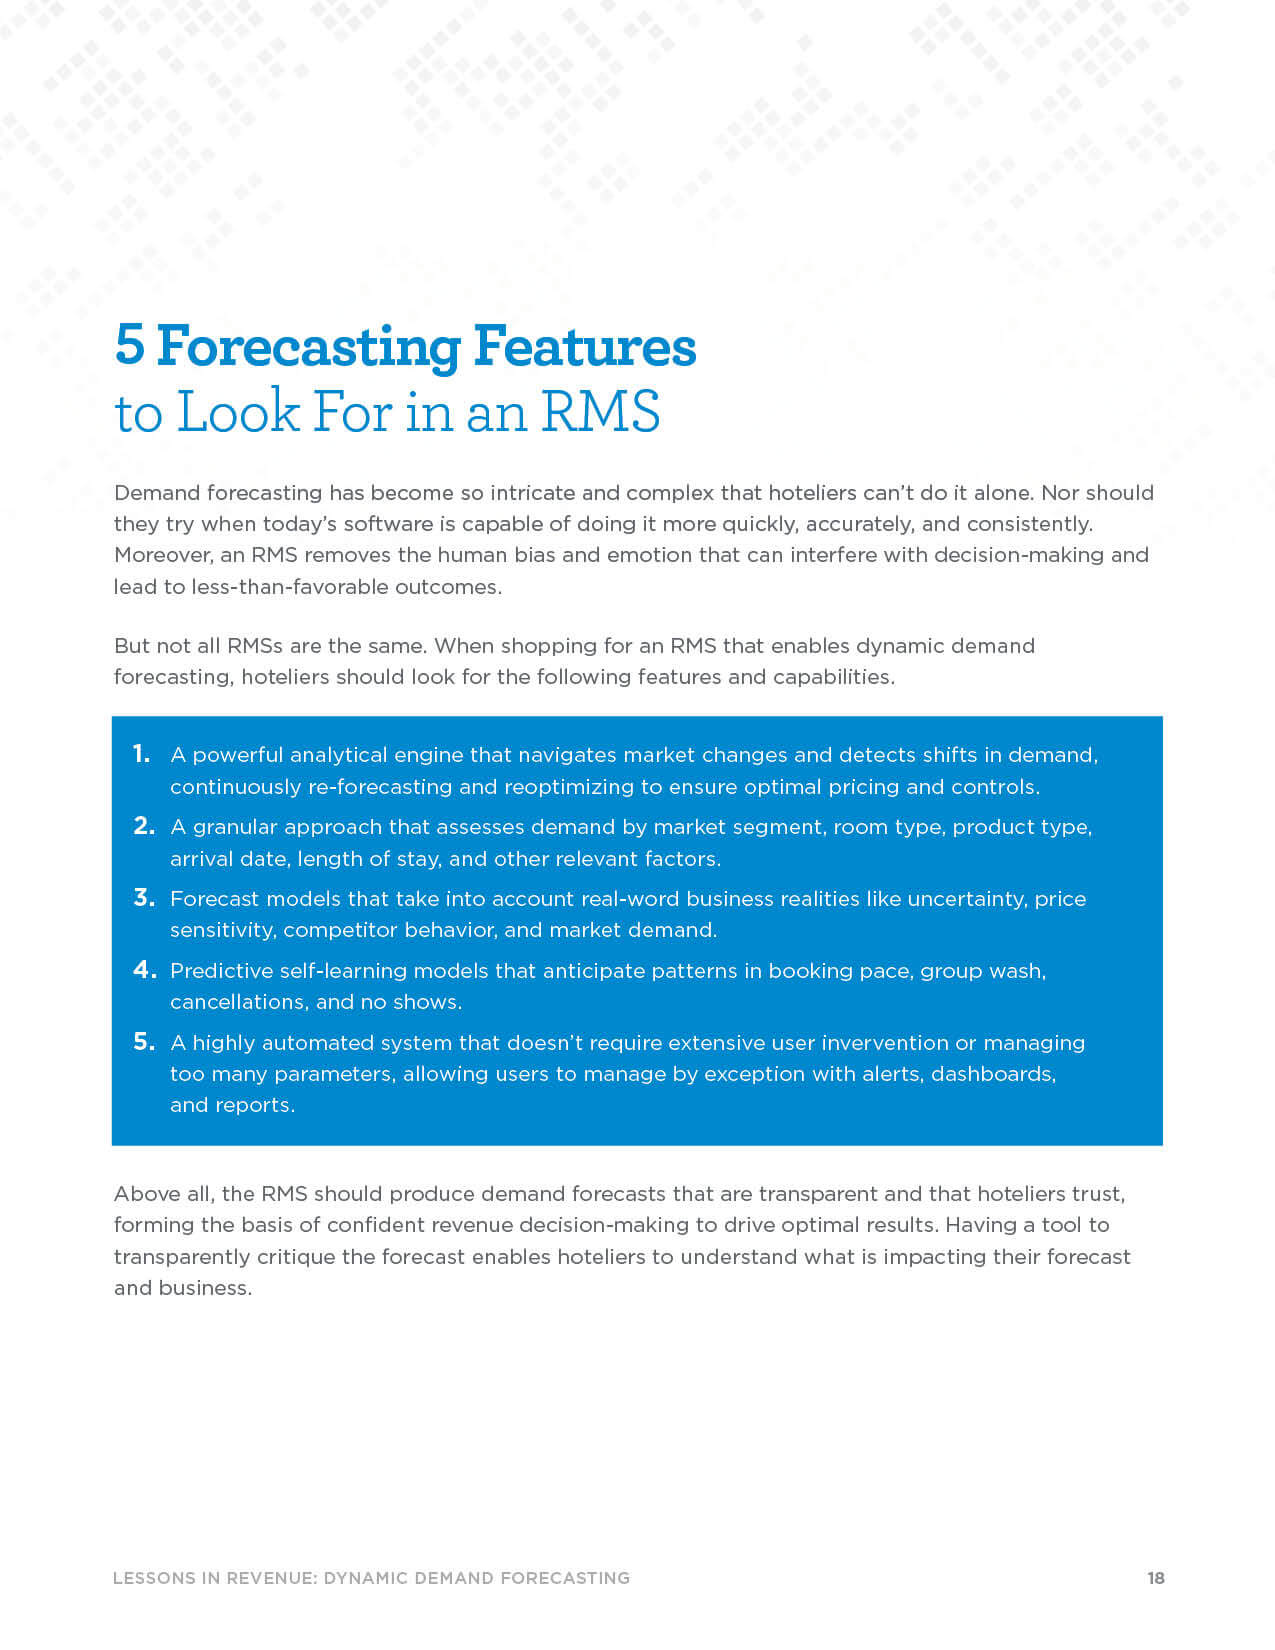 Page 18 - 5 Forecasting Features to Look For in an RMS